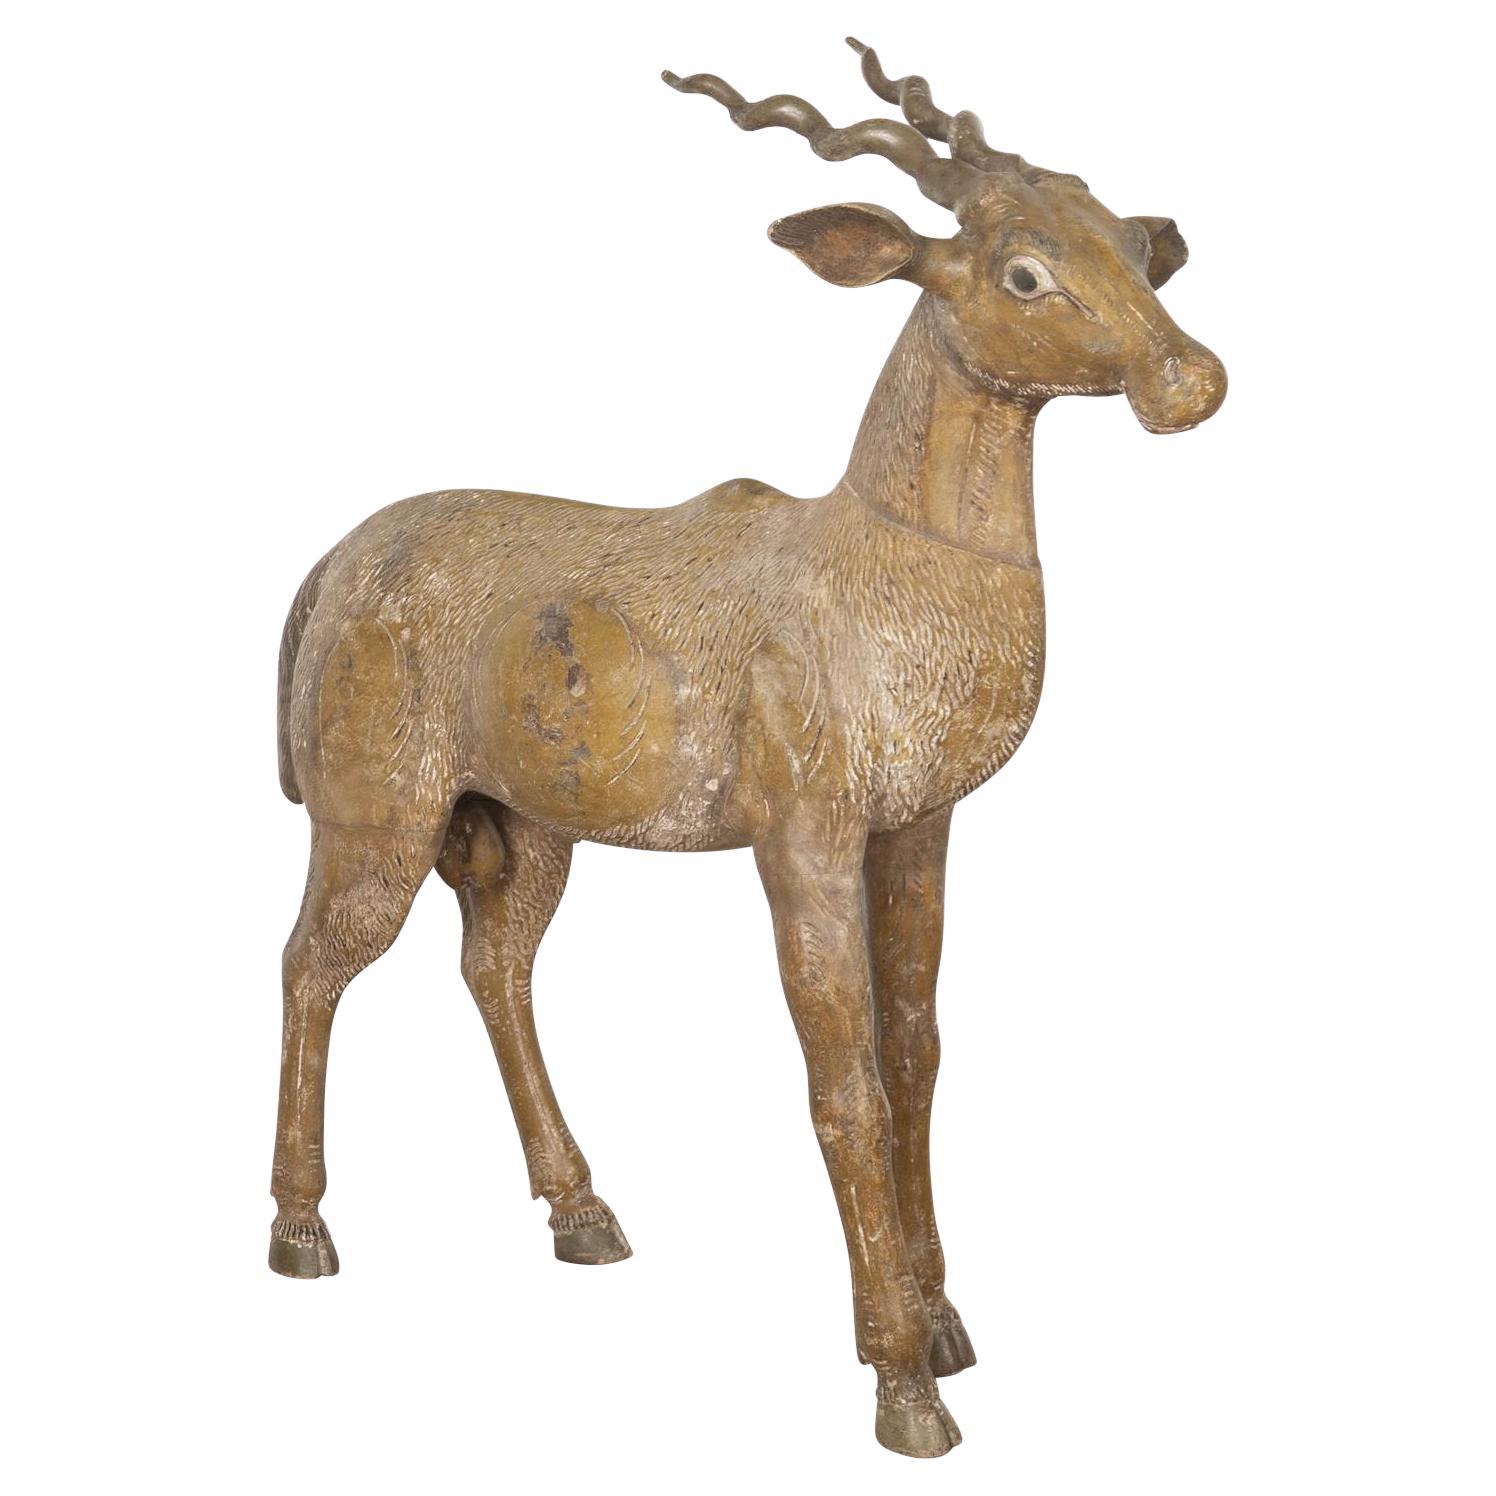 Lifesize 19th Century Quirky Carved Wood Antelope For Sale